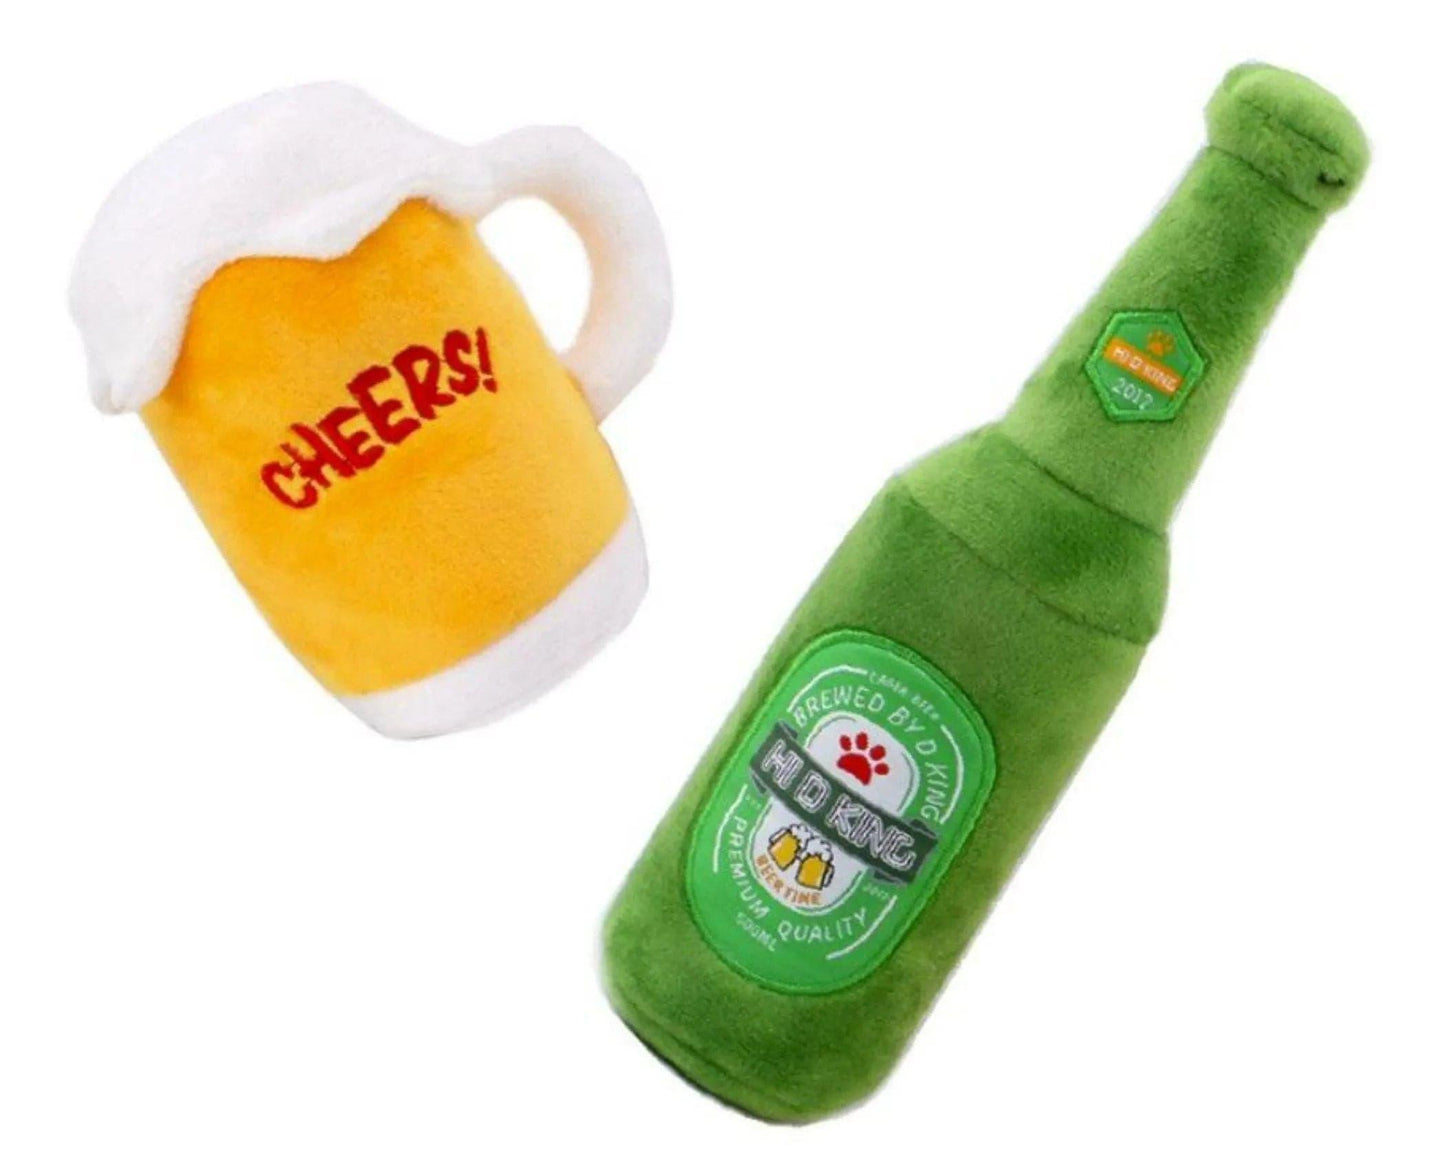 Beer Bottle, Cheers Cup Plush Toy - Puppy Artisan